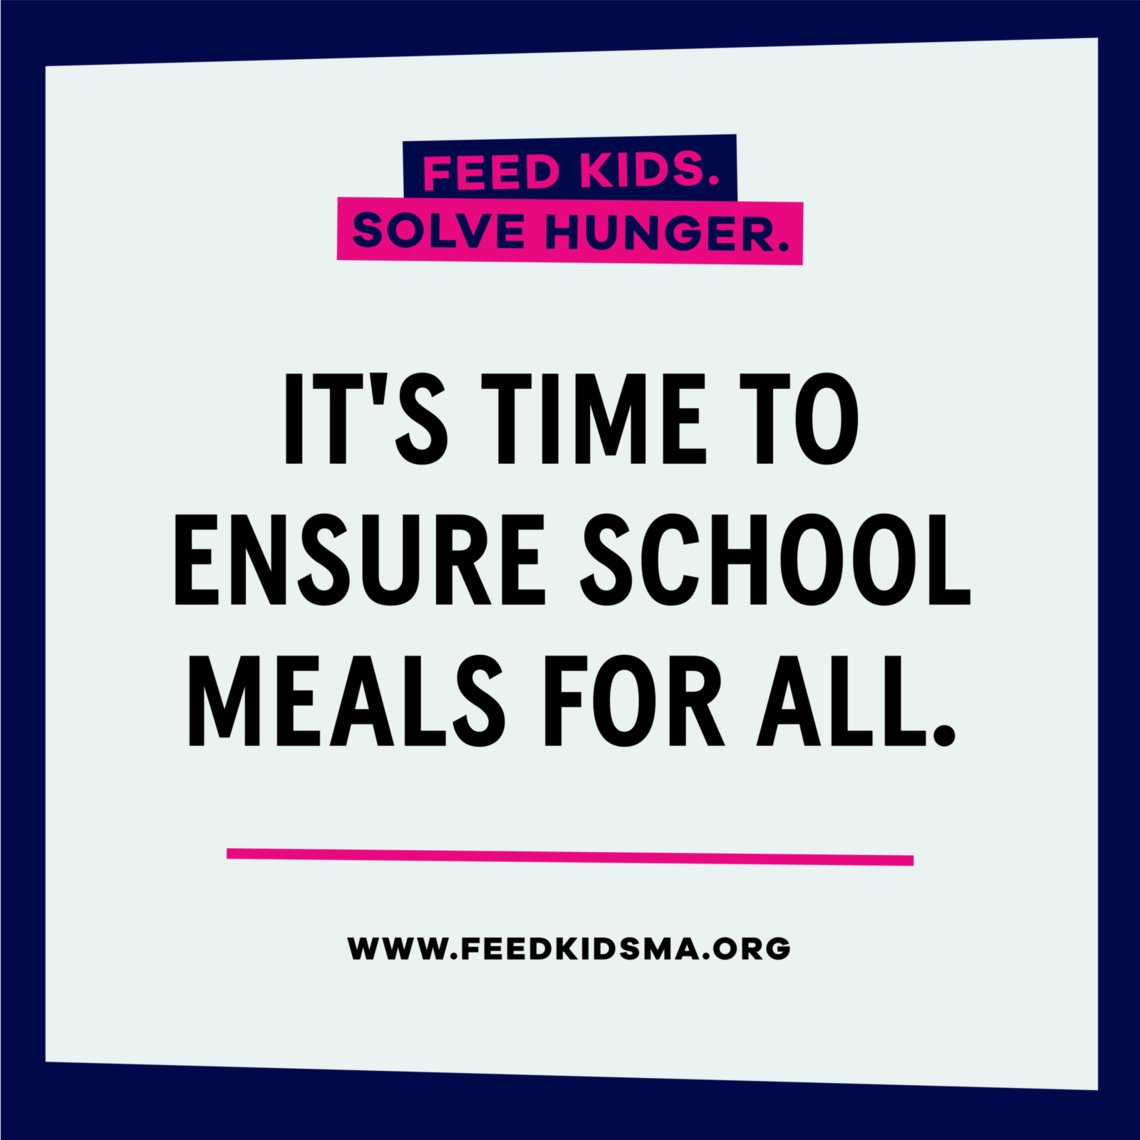 It's Time to Ensure School Meals for All